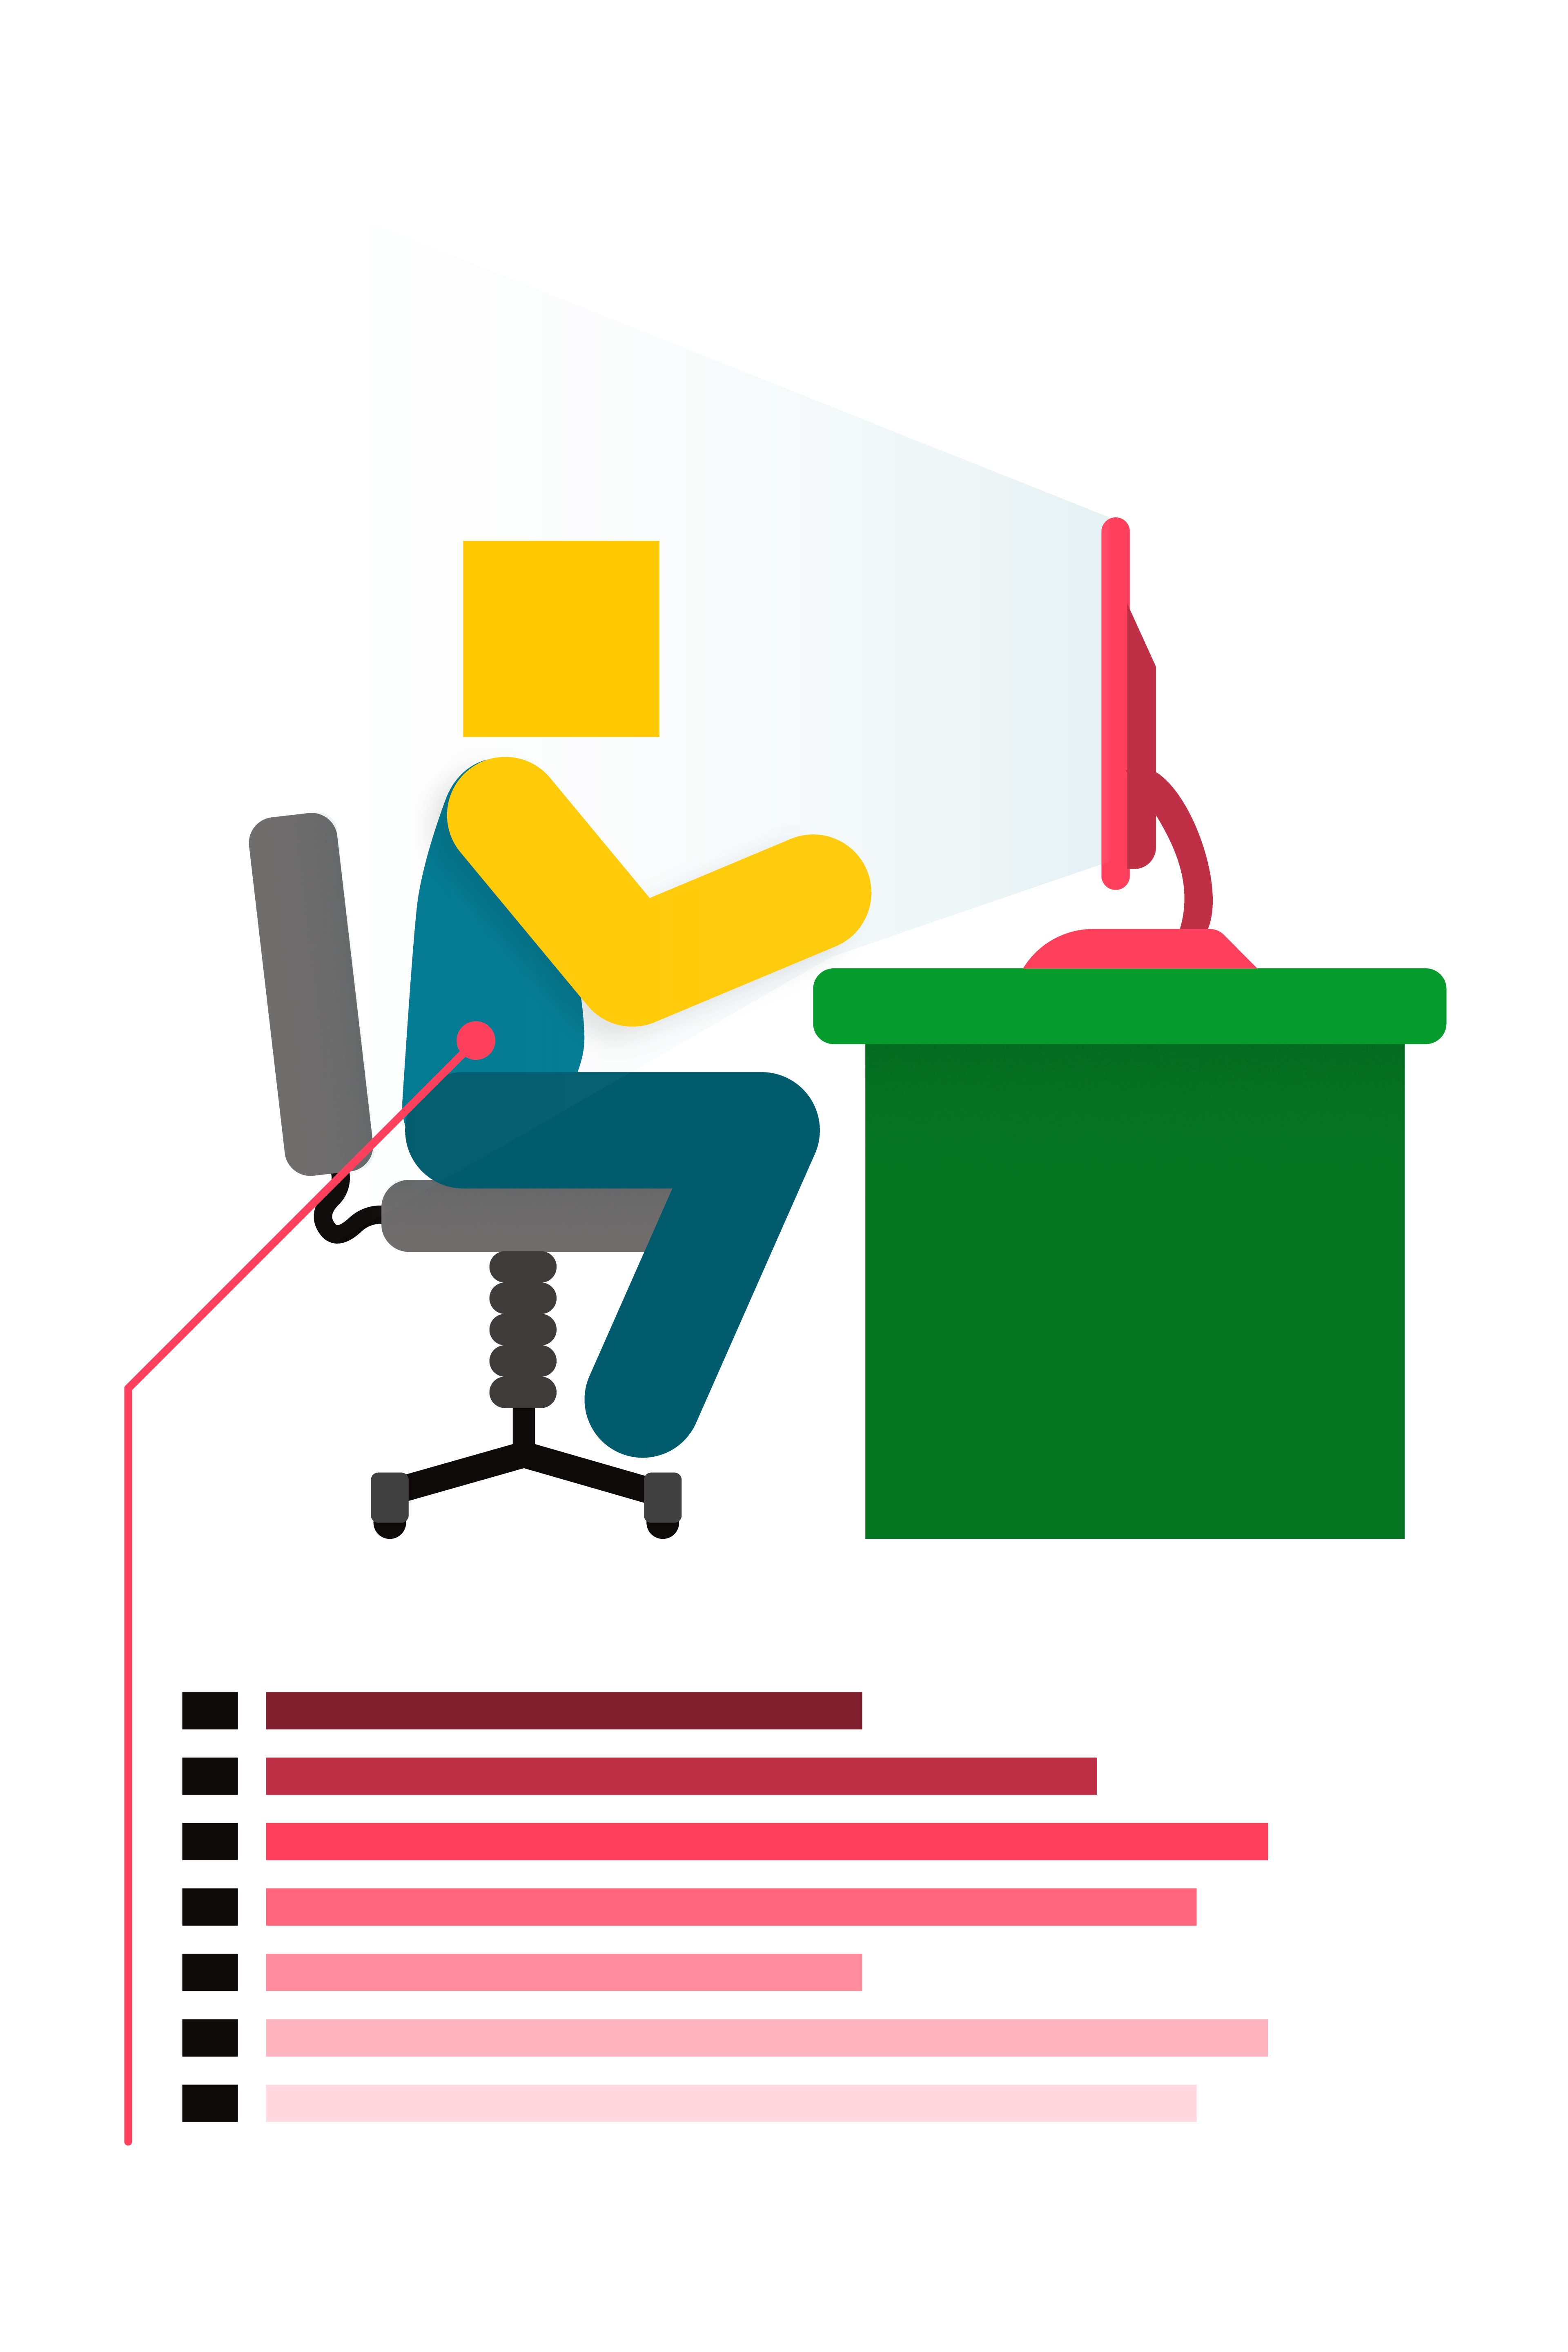 illustration of person on keyboard with graphs